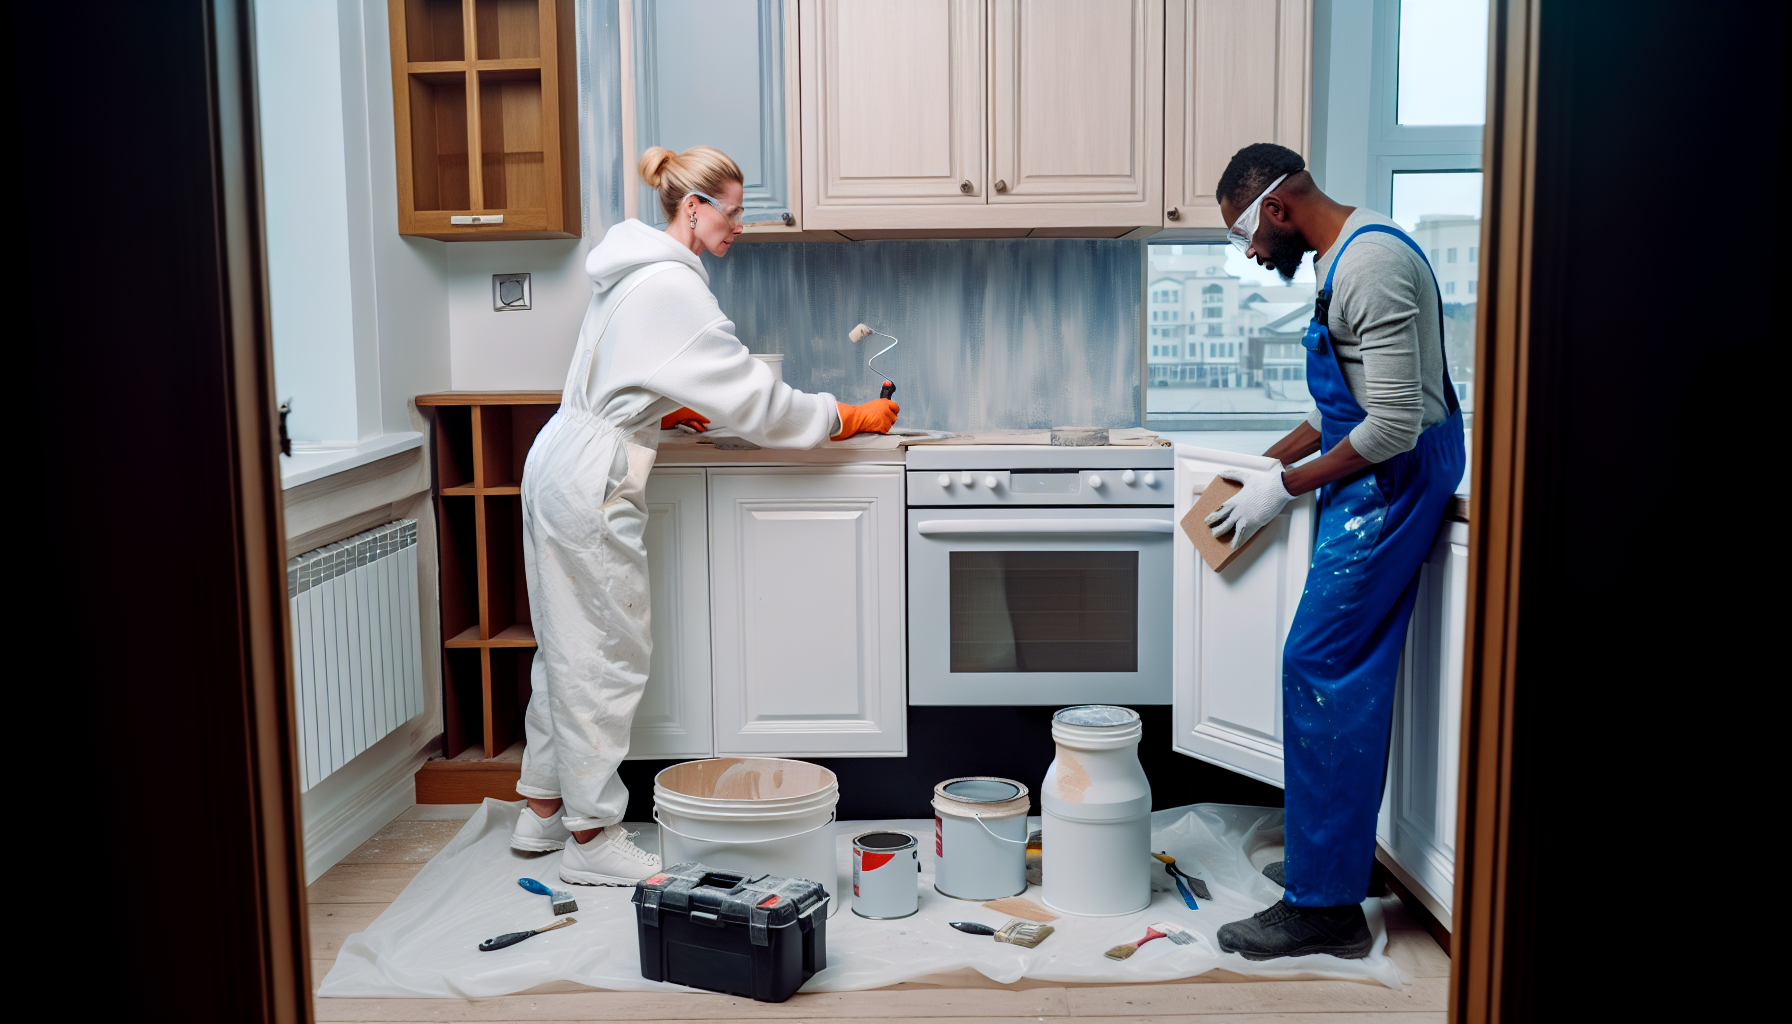  kitchen cabinet refinishing services in Los Angeles